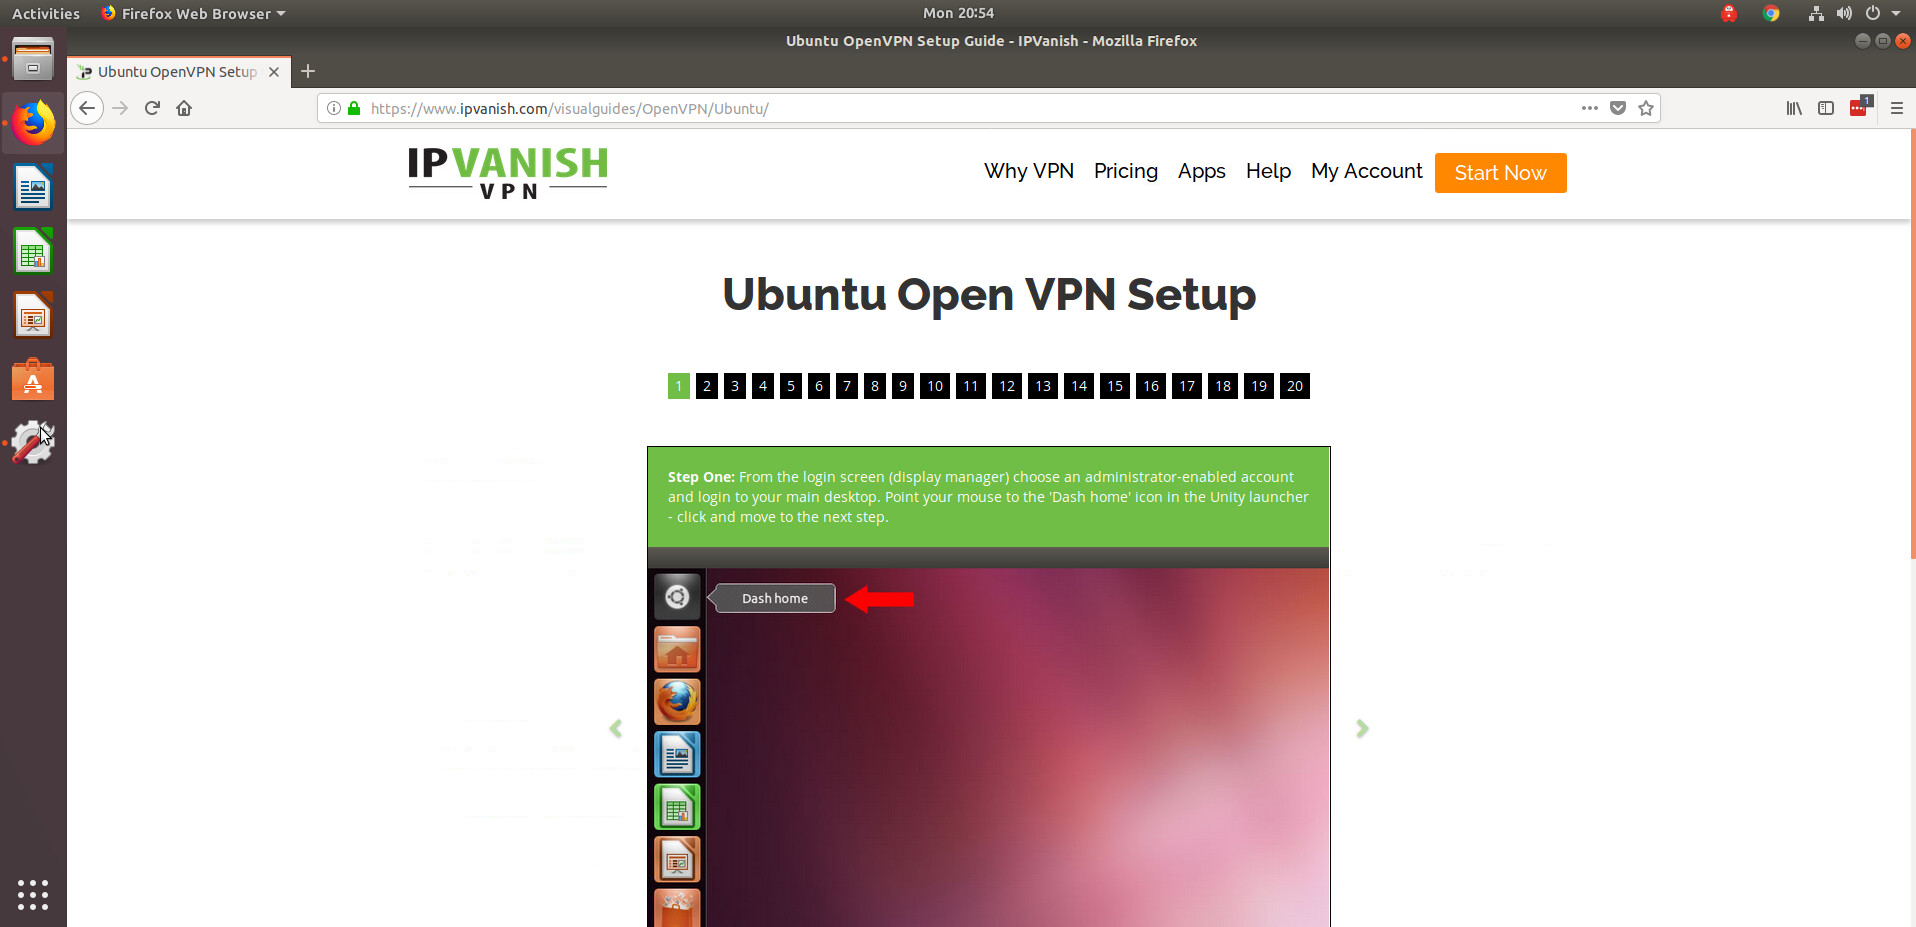 IPVanish VPN (for Linux) - Excellent visual guide for setting up IPVanish under Linux.